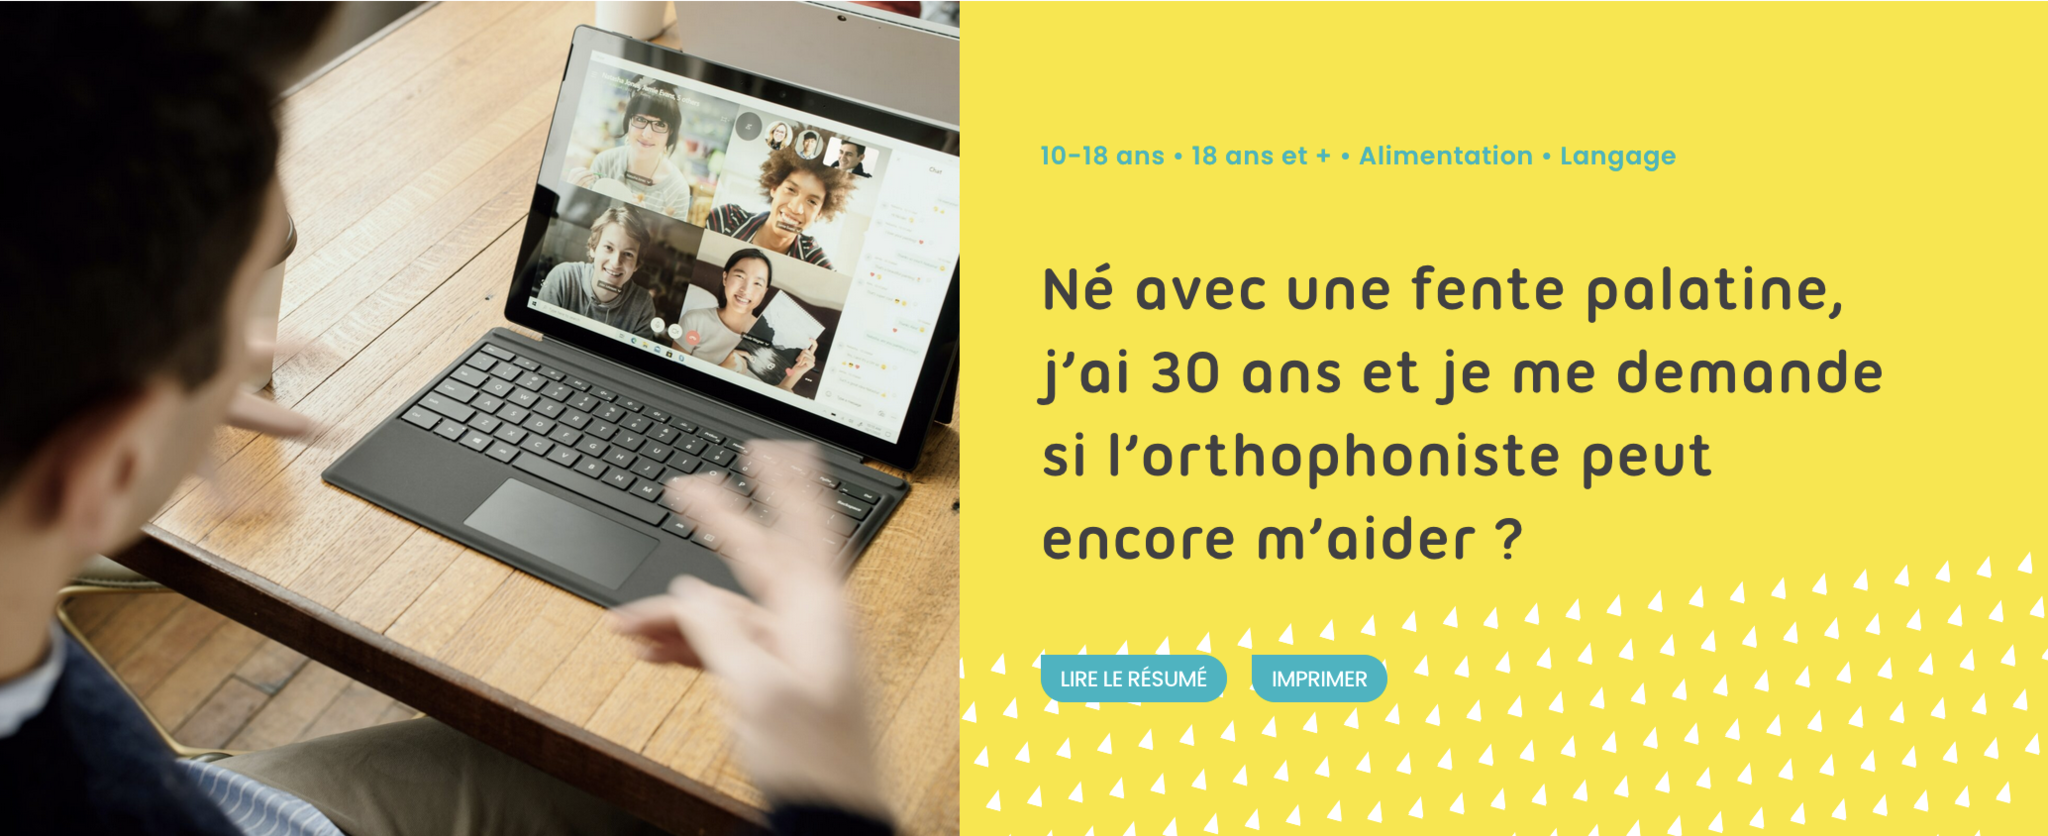 Image site Allo Ortho Page FP 30 ans